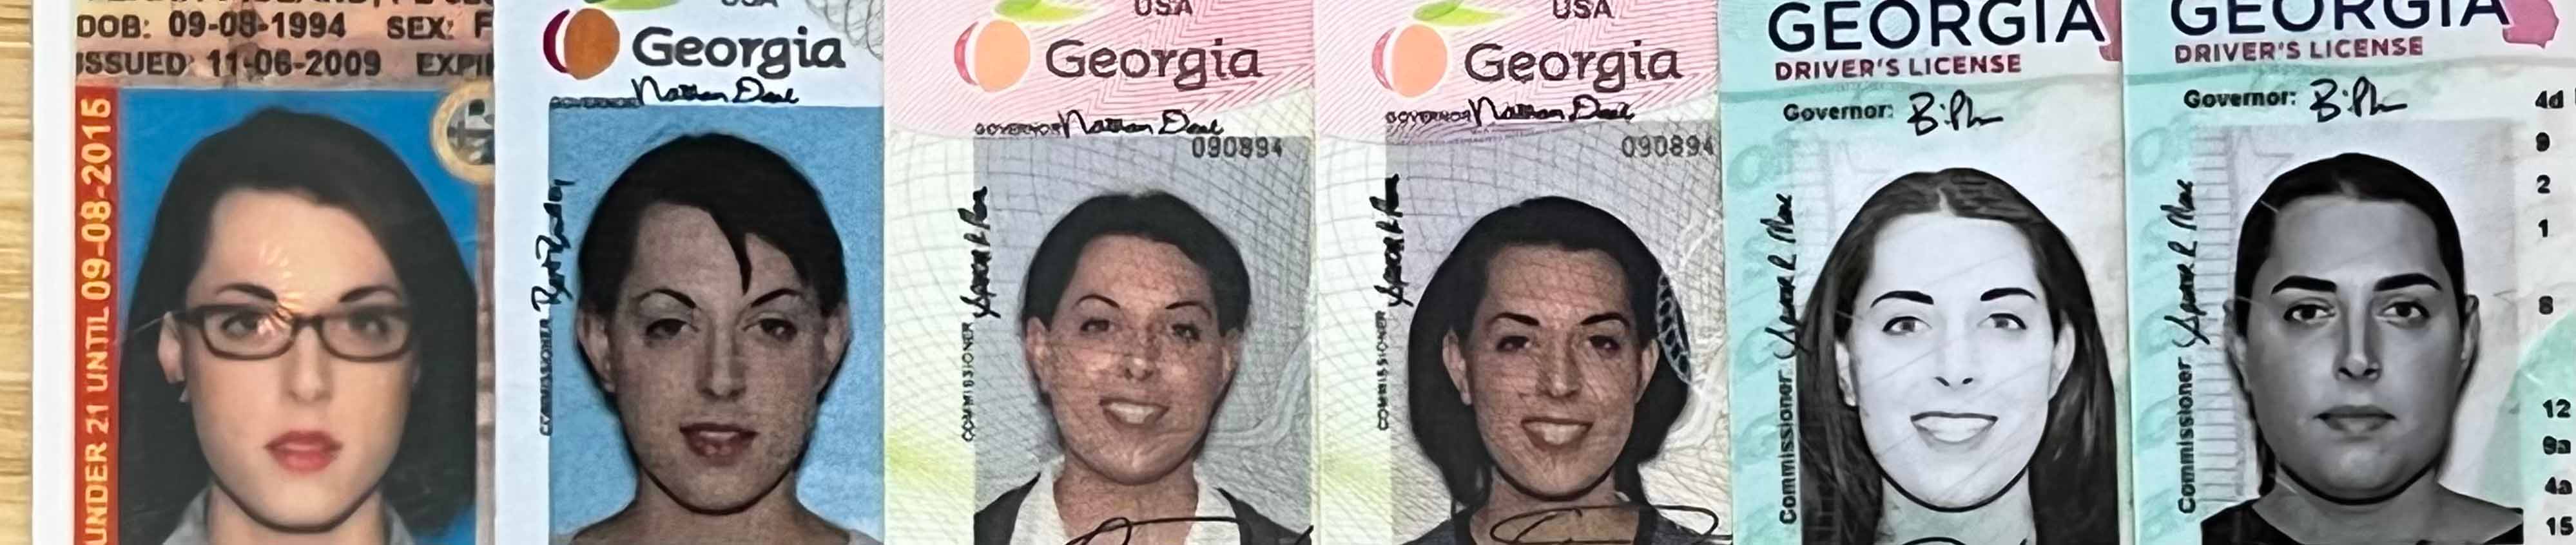 A horizontal photo showing six driver's license ID portraits, ranging from oldest to newest. All except the first are from Georgia. The first is from Florida.